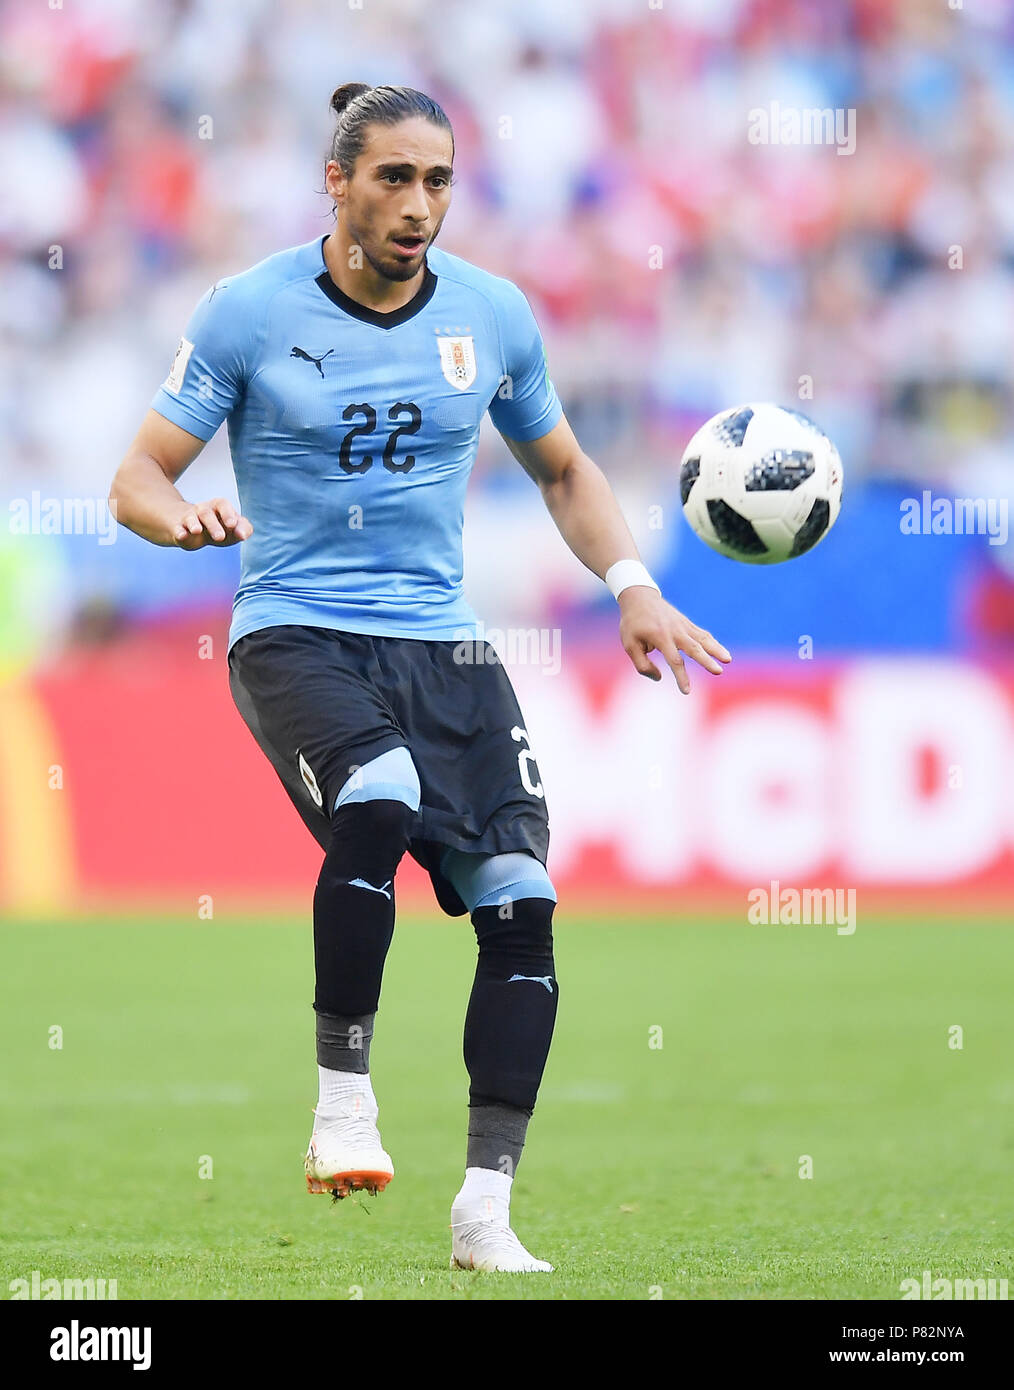 SAMARA, RUSSIA - JUNE 25: Martin Caceres of Uruguay in action during the 2018 FIFA World Cup Russia group A match between Uruguay and Russia at Samara Arena on June 25, 2018 in Samara, Russia. (Photo by Lukasz Laskowski/PressFocus/MB Media) Stock Photo